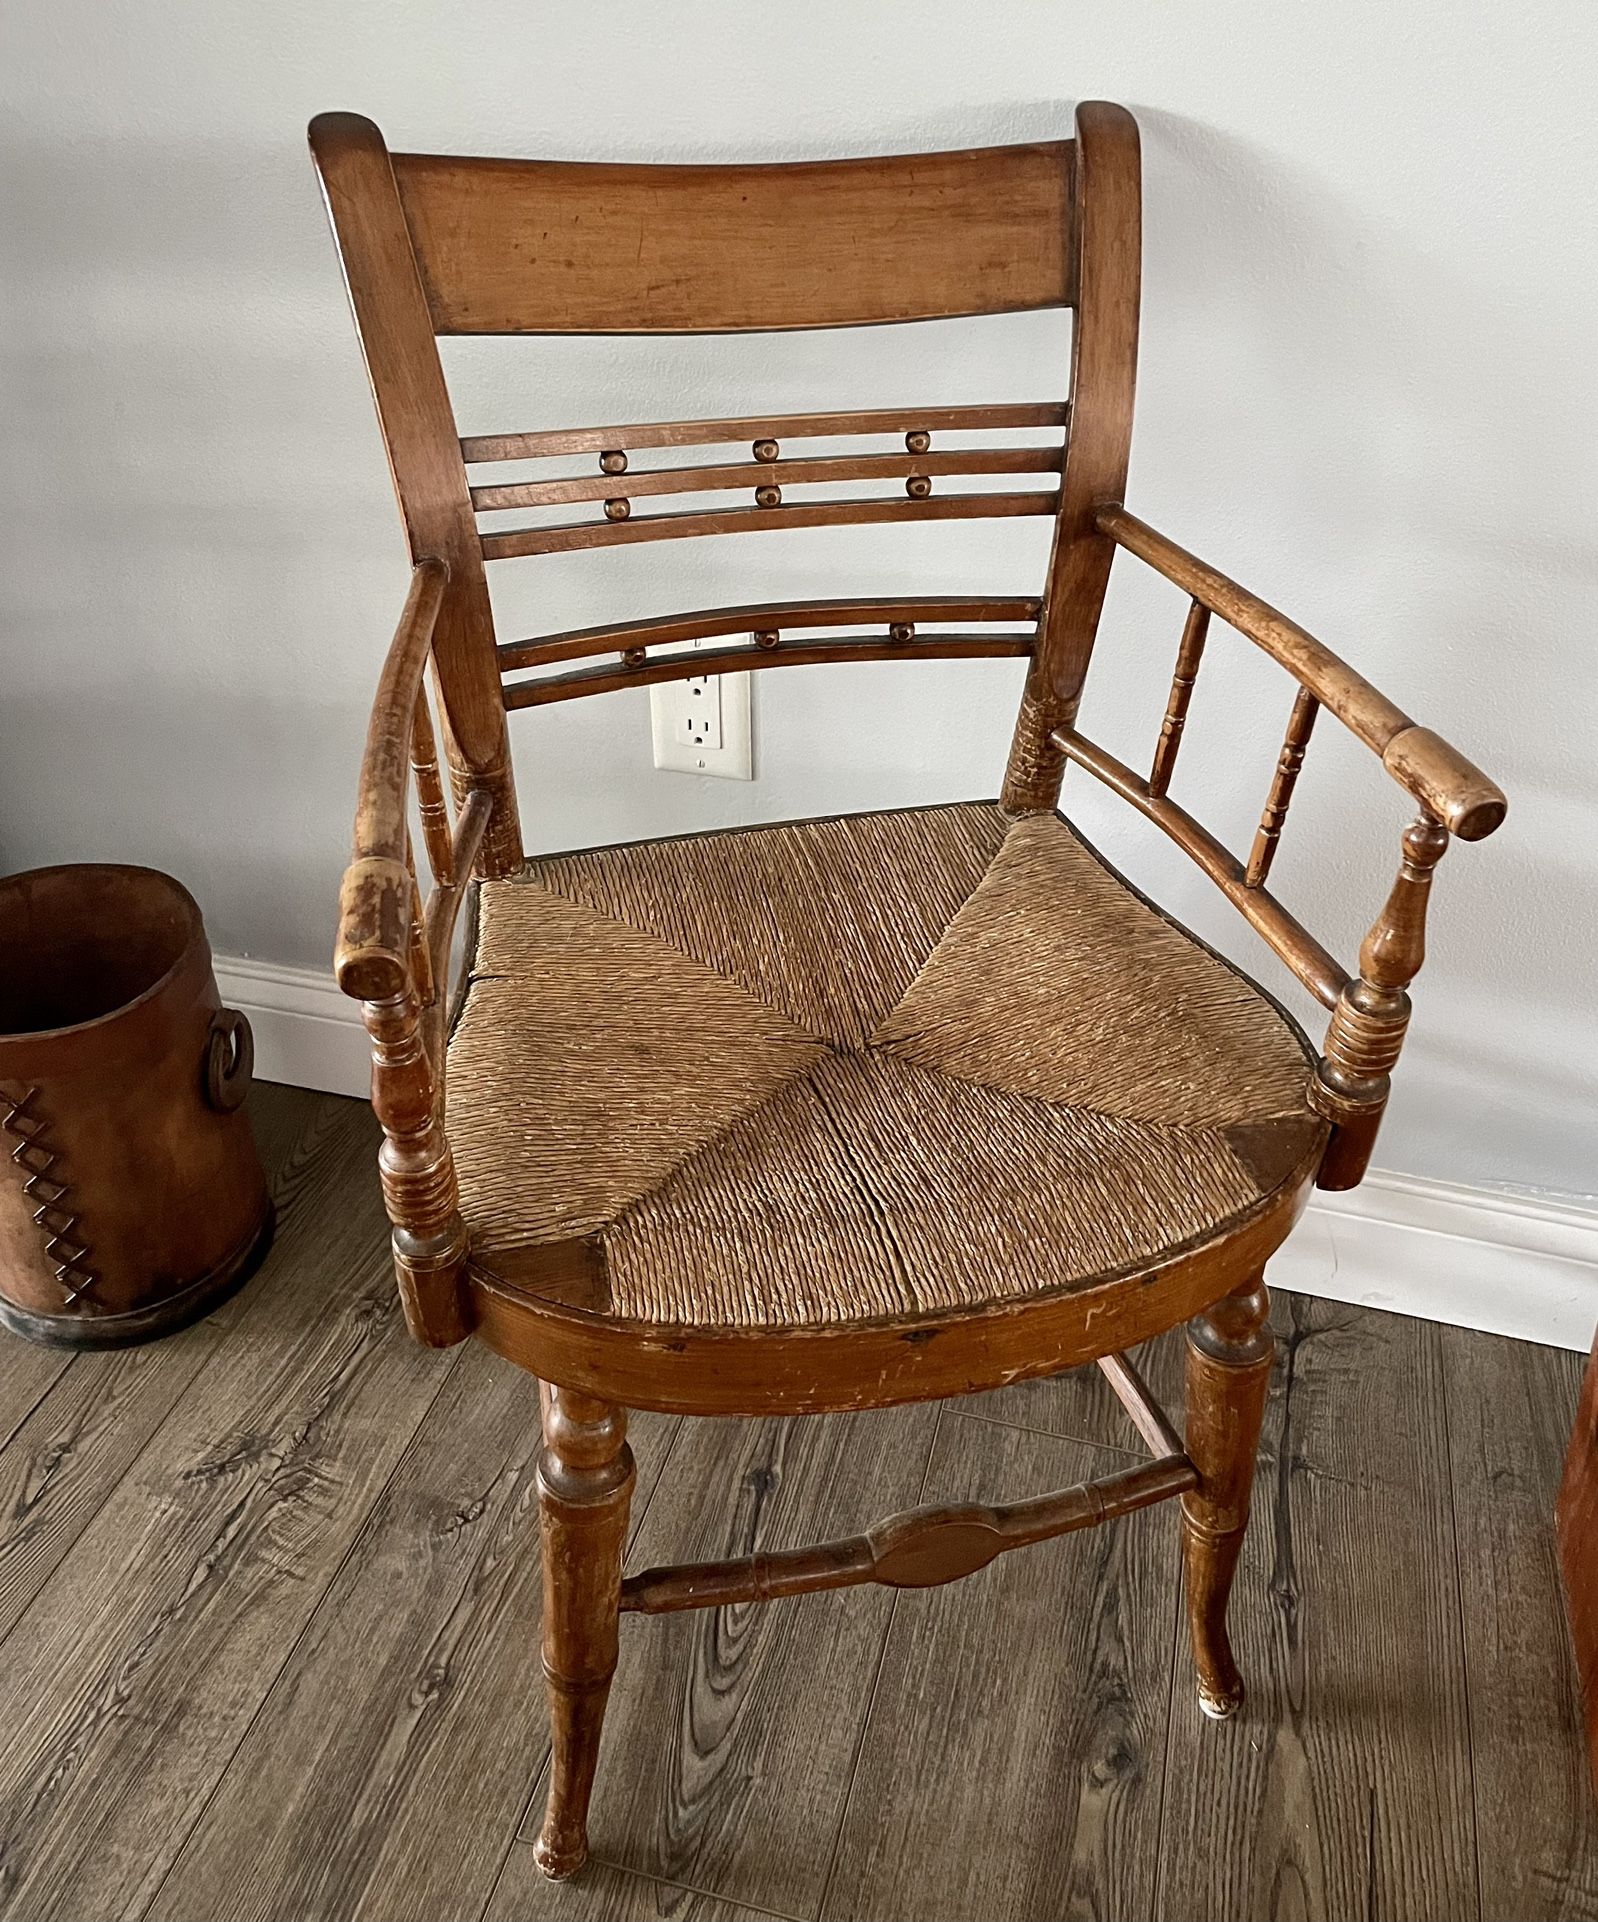 Wooden Antique chair with caned seat. Nice detail